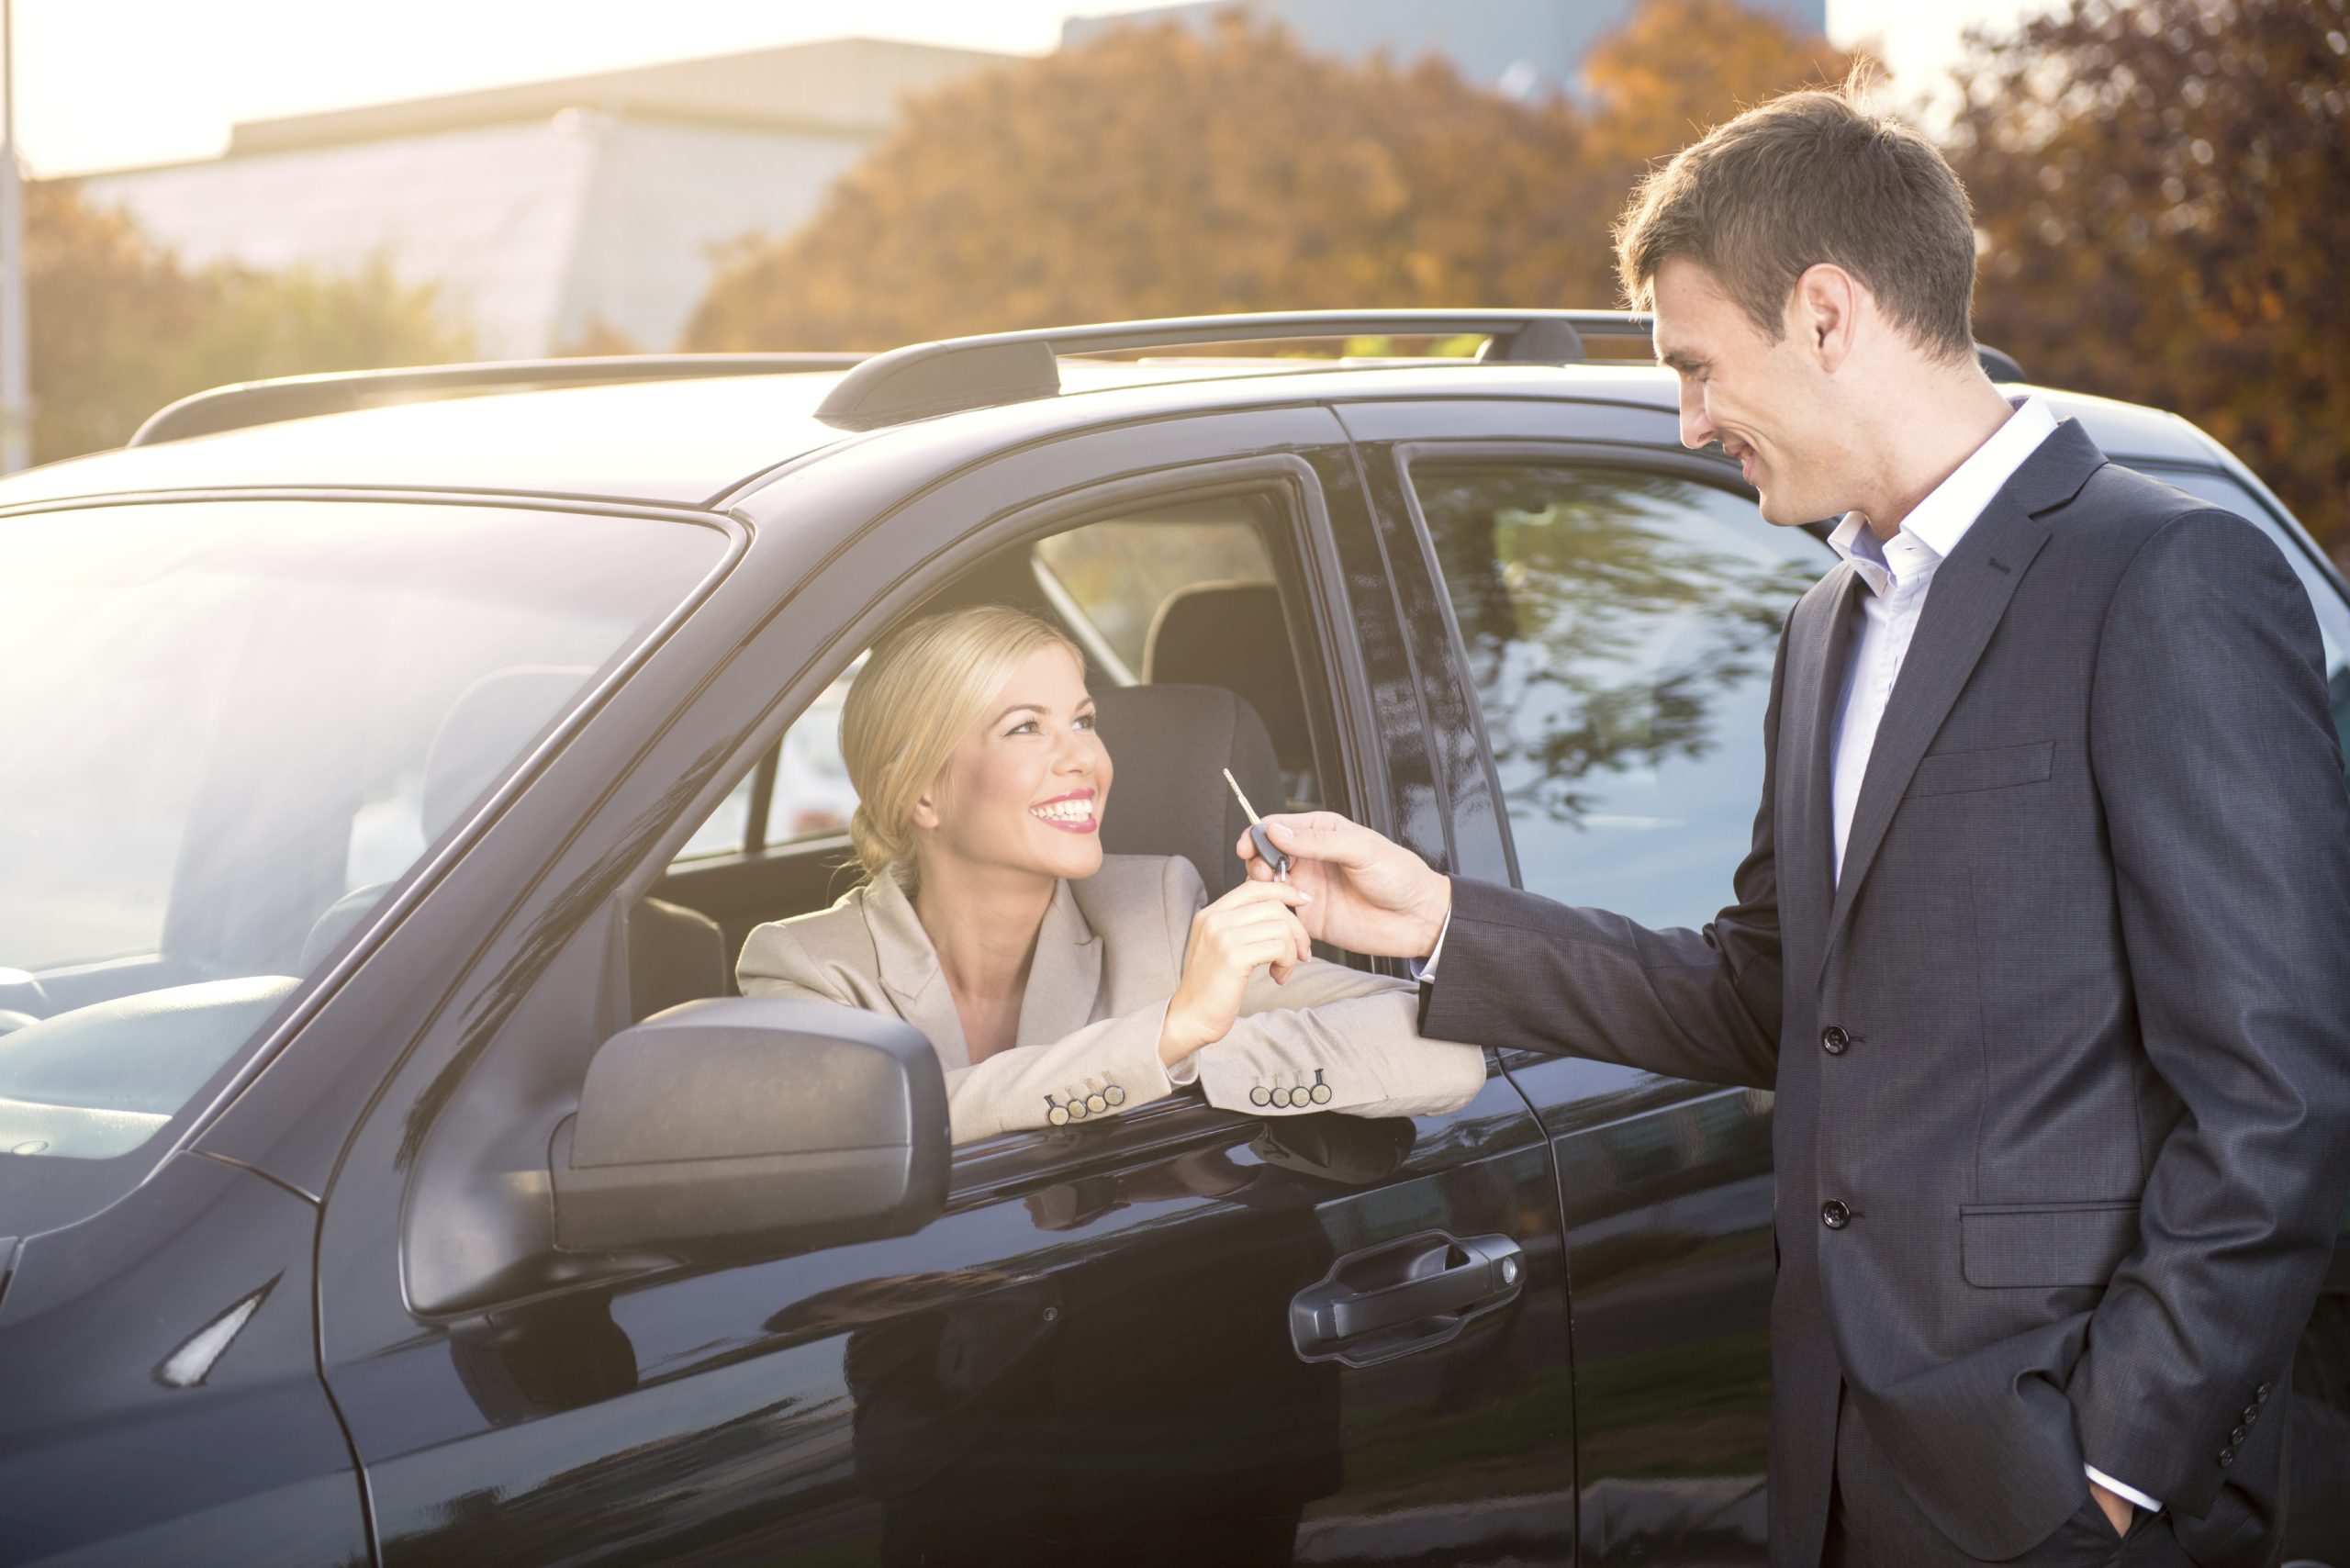 What do I need when renting a car?